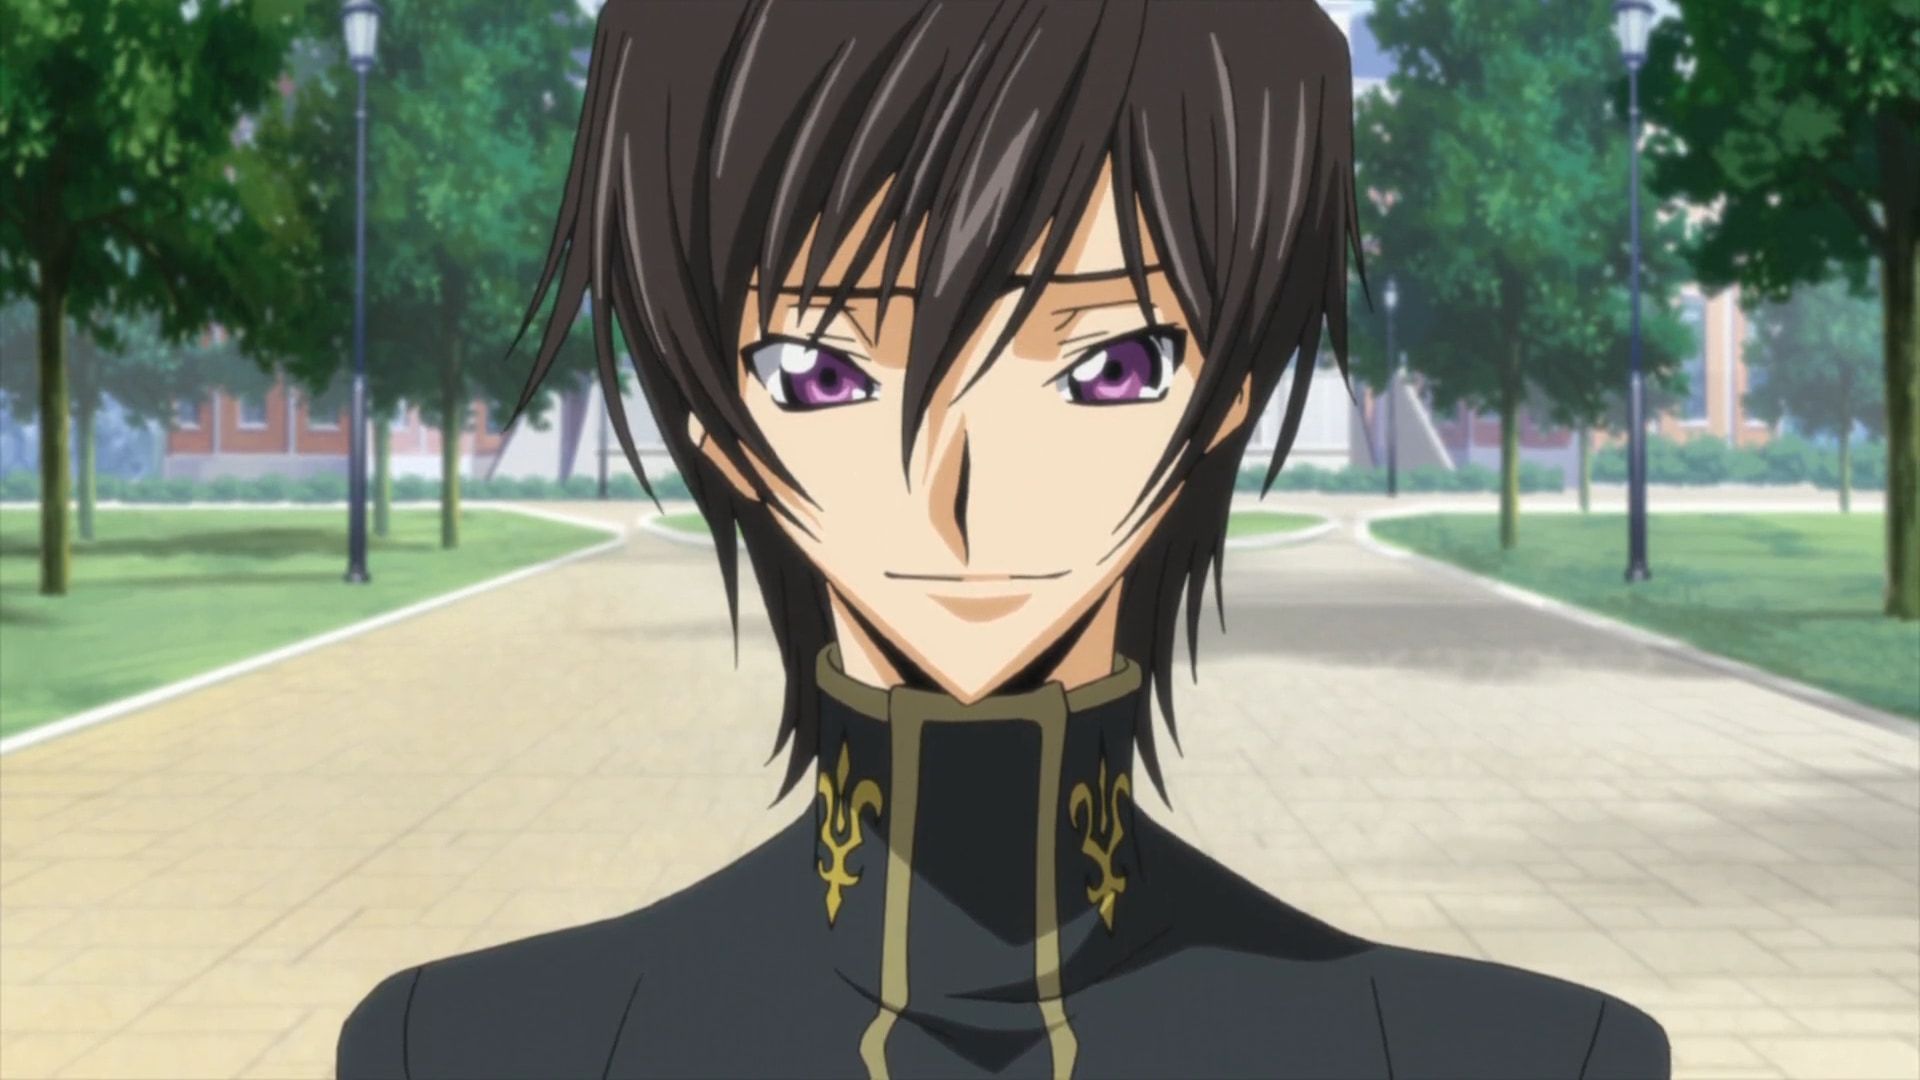 Lelouch is one of the anime main characters more developed than Yuji (Image via Sunrise Studios)